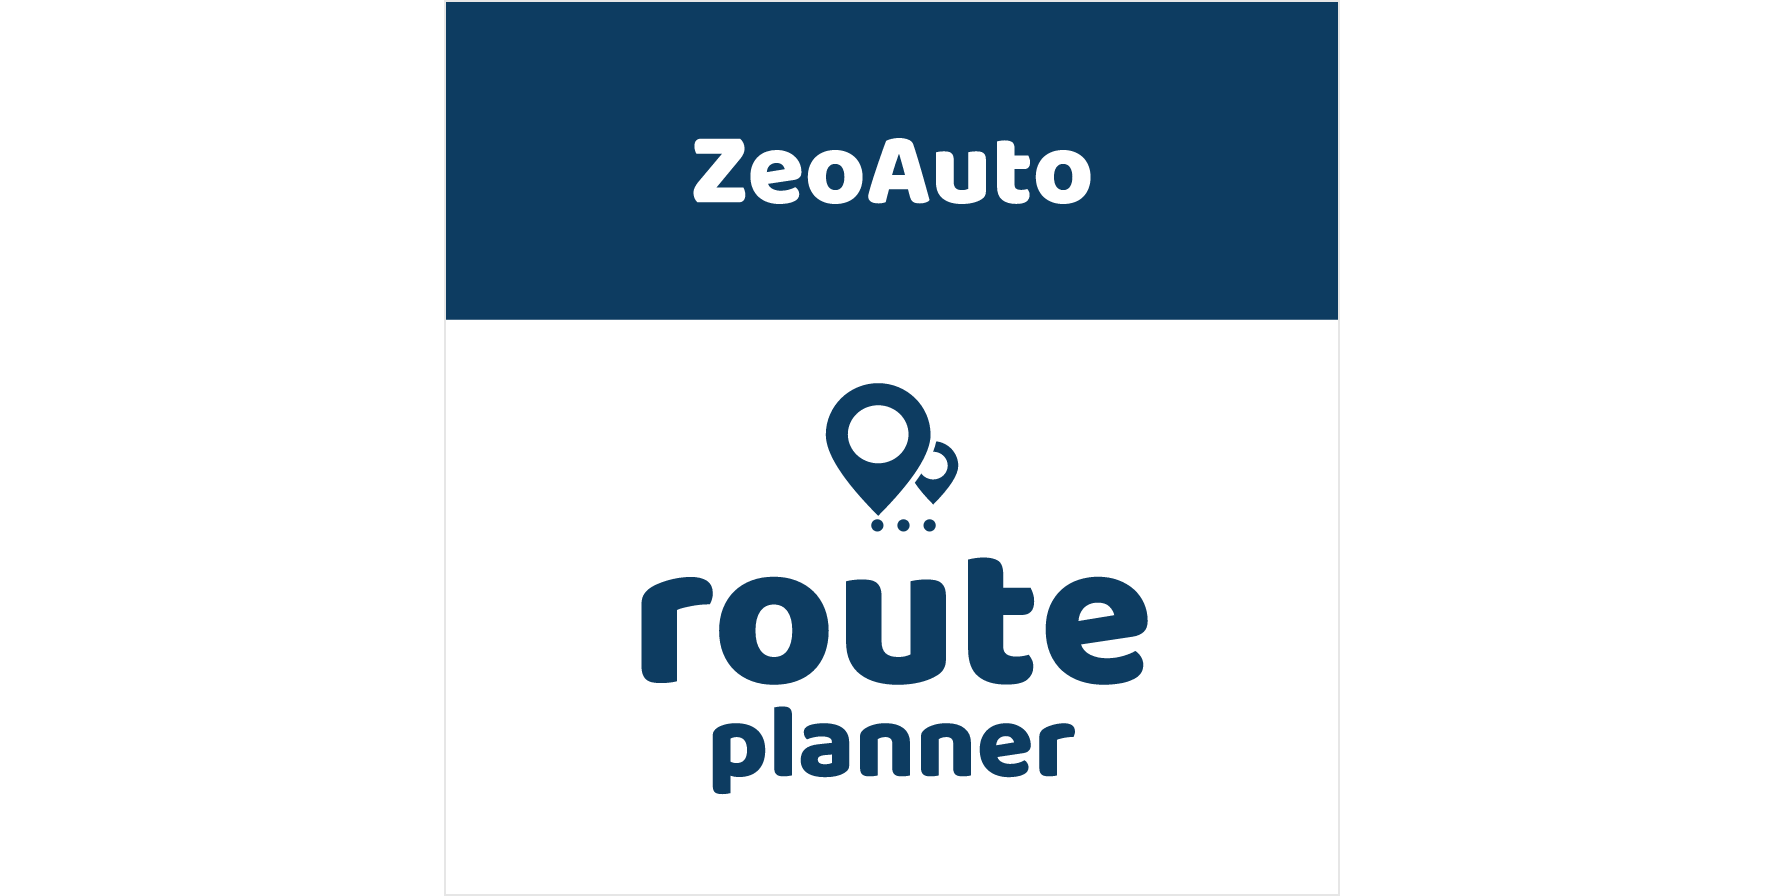 Zeo Route Planner. Zeo Auto has decided to make route… | by Zeo Auto |  Medium